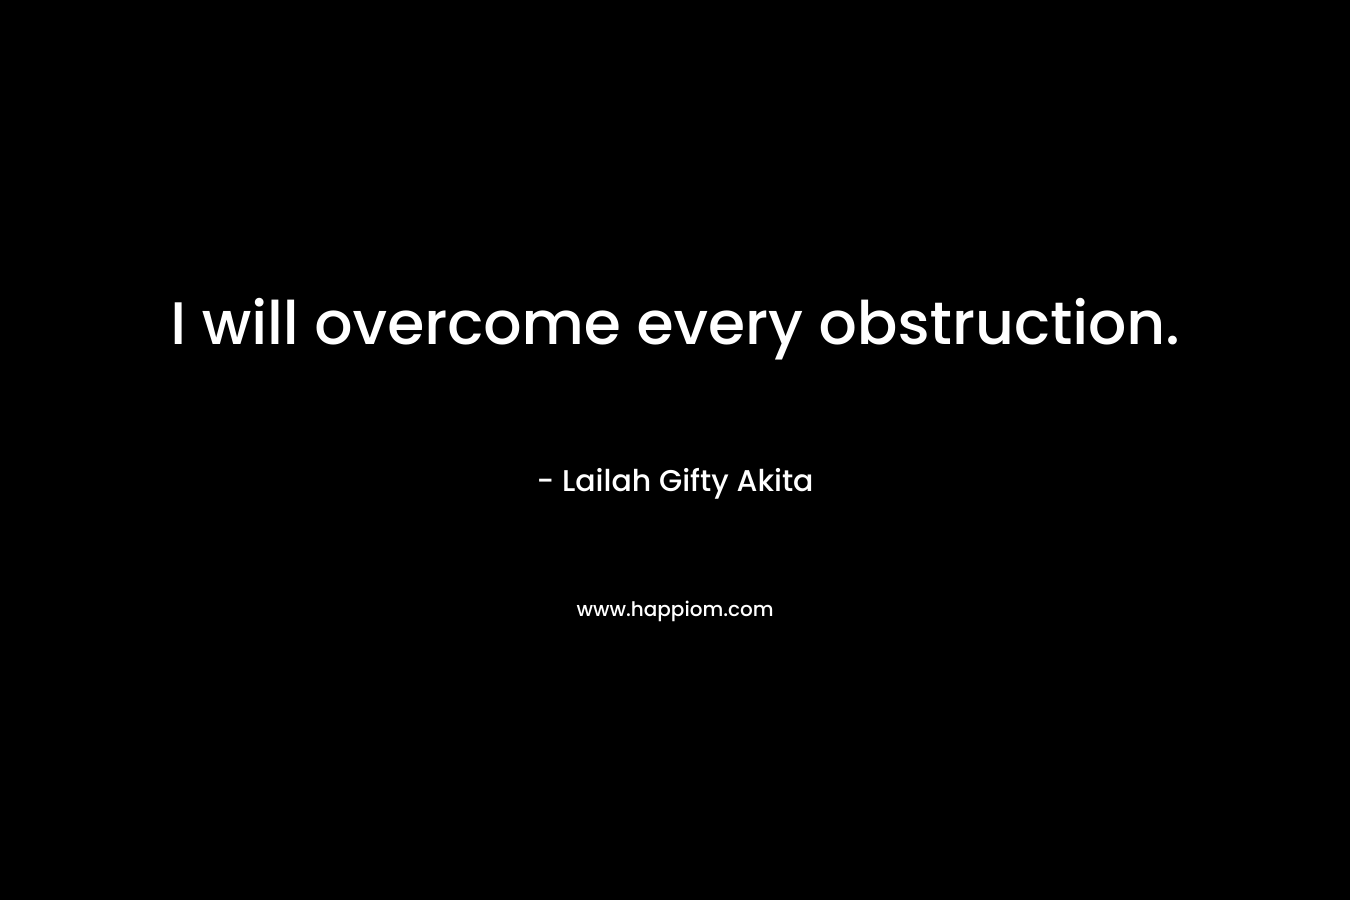 I will overcome every obstruction.